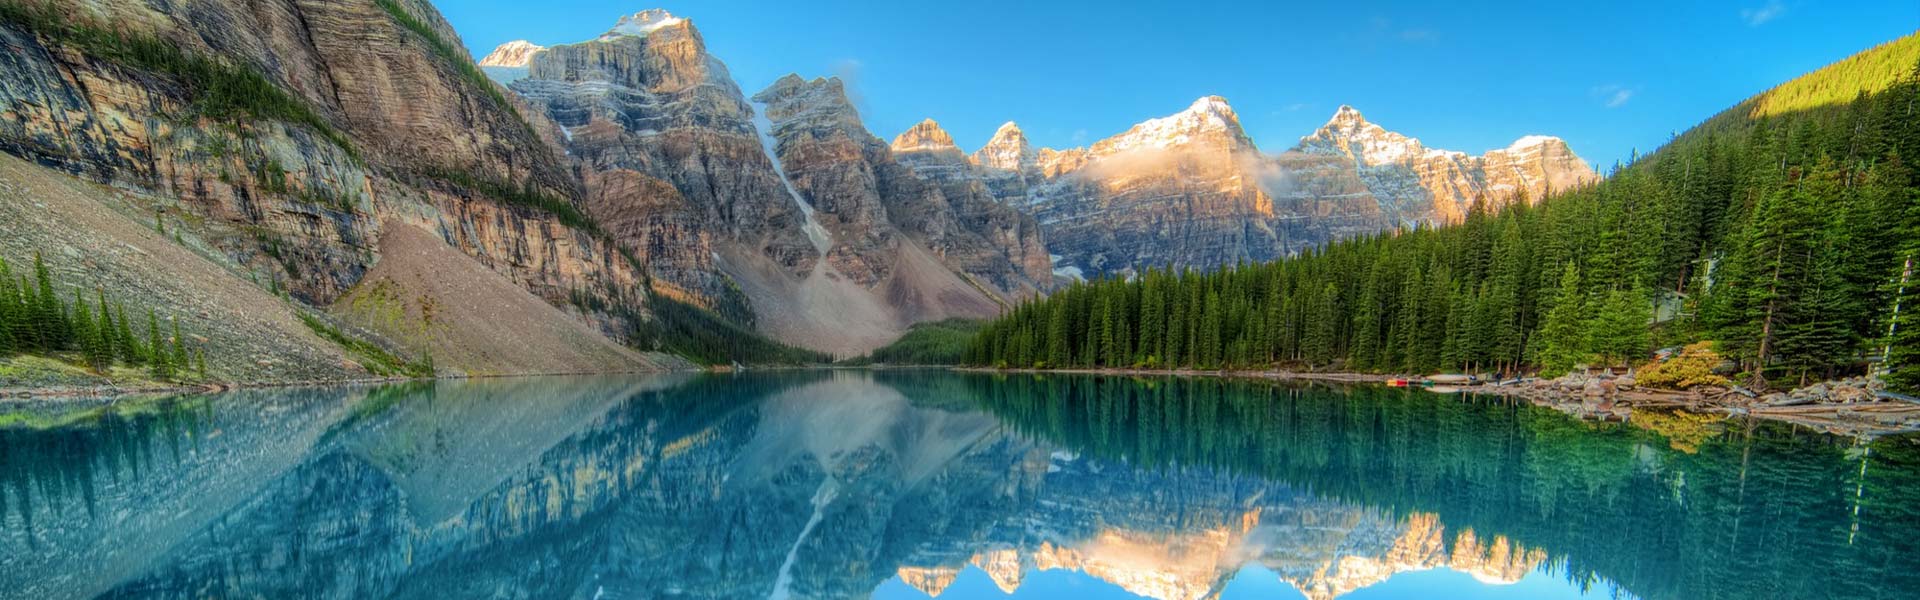 Best Canadian Rockies Vacation Packages | Road Trips | Train Trips